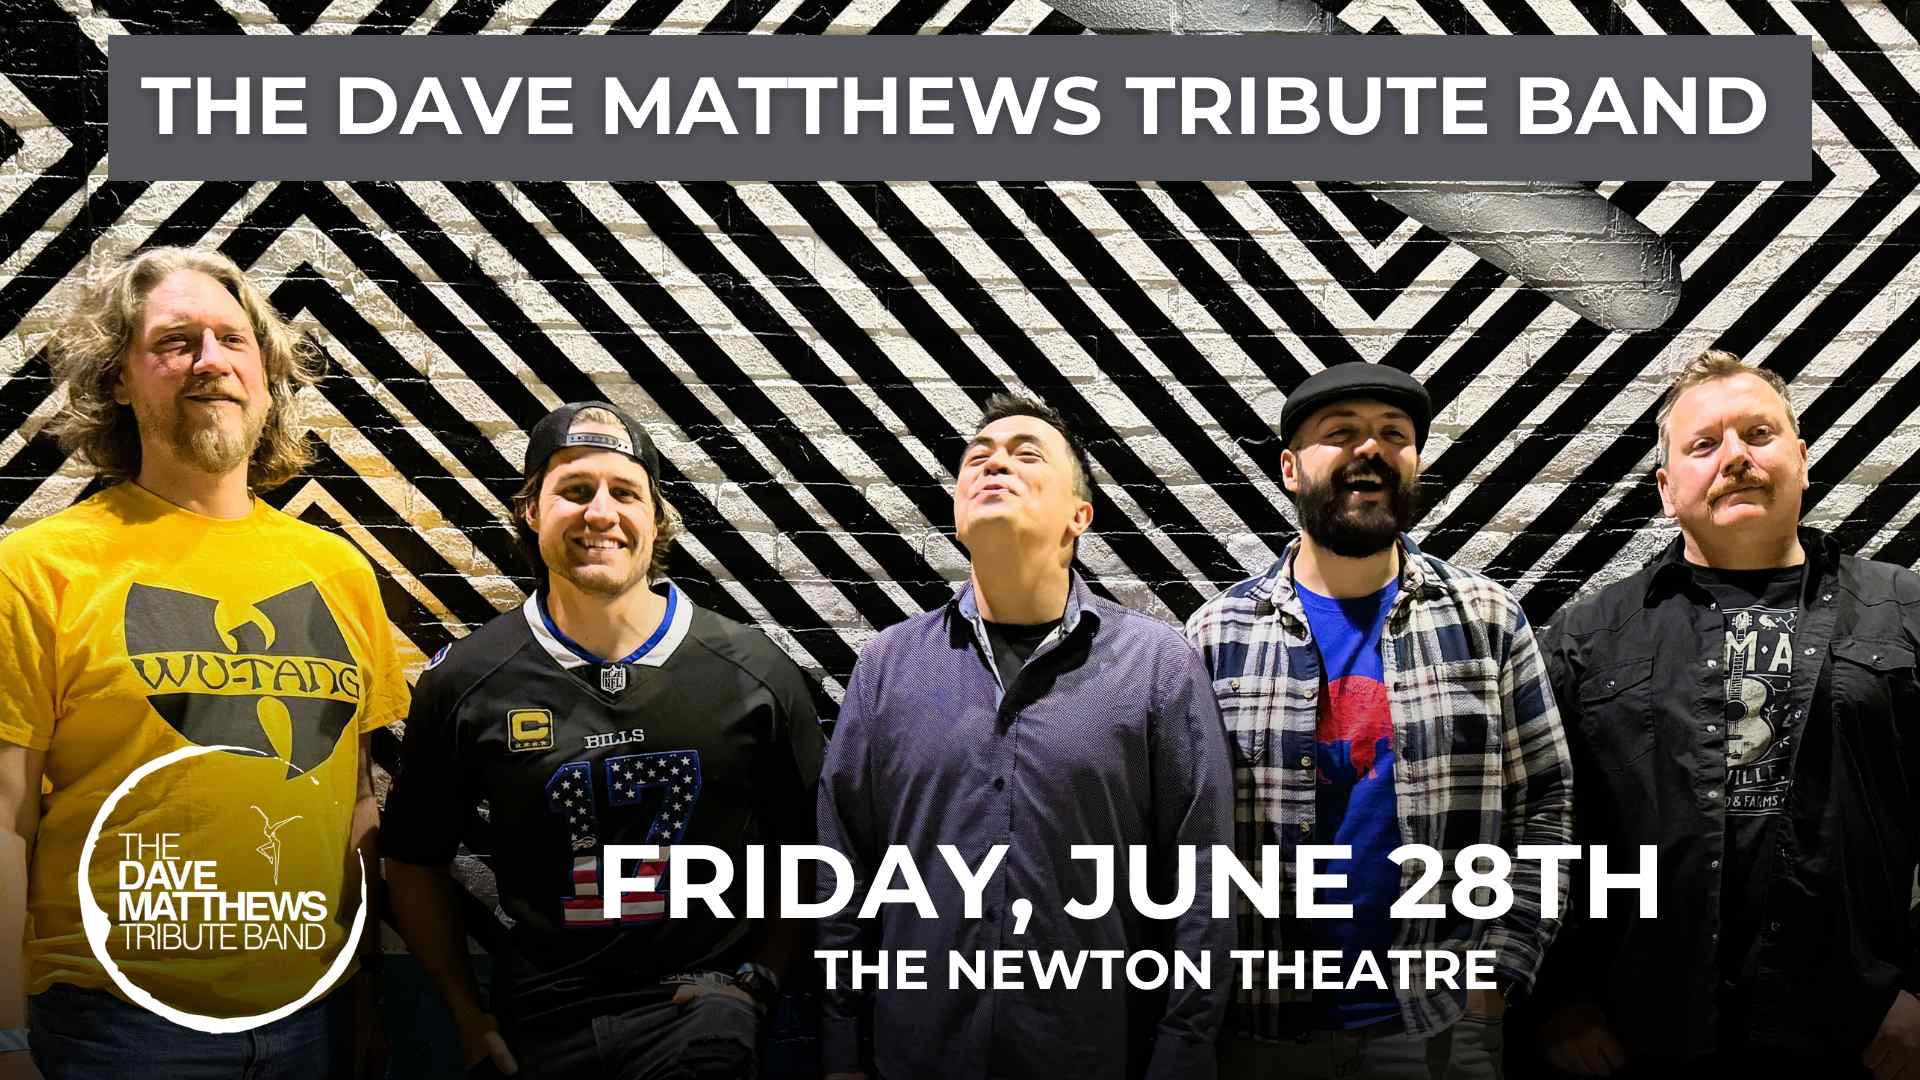 The Dave Matthews Tribute Band plays The Newton Theatre on Friday, June 28th.